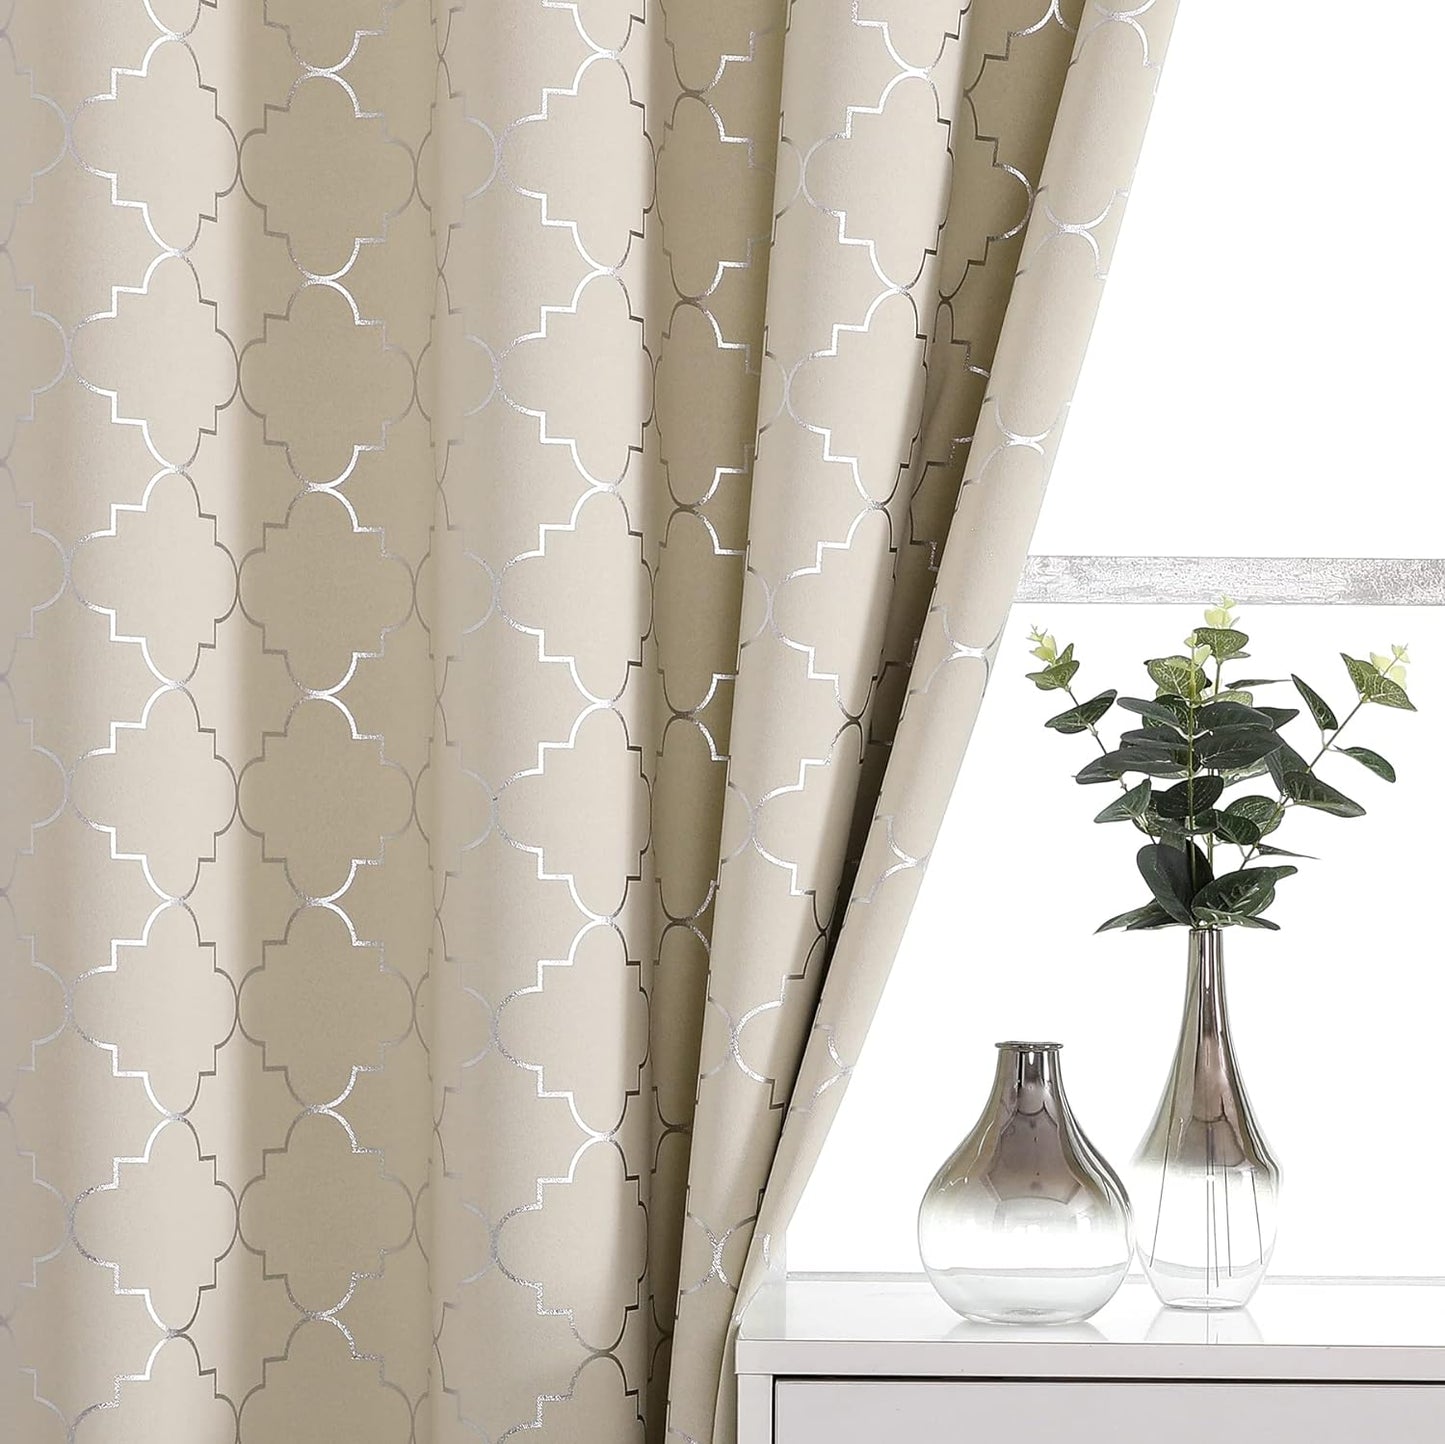 Enactex 100% Full Blackout Curtains 63 Inch Length Thermal Insulated Grey Curtain with Gold Geometric Metallic Pattern, Light Blocking Grommet Window Drapes for Living Room Bedroom, 2 Panels  Enactex Beige/Silver W52" X L84" X2 